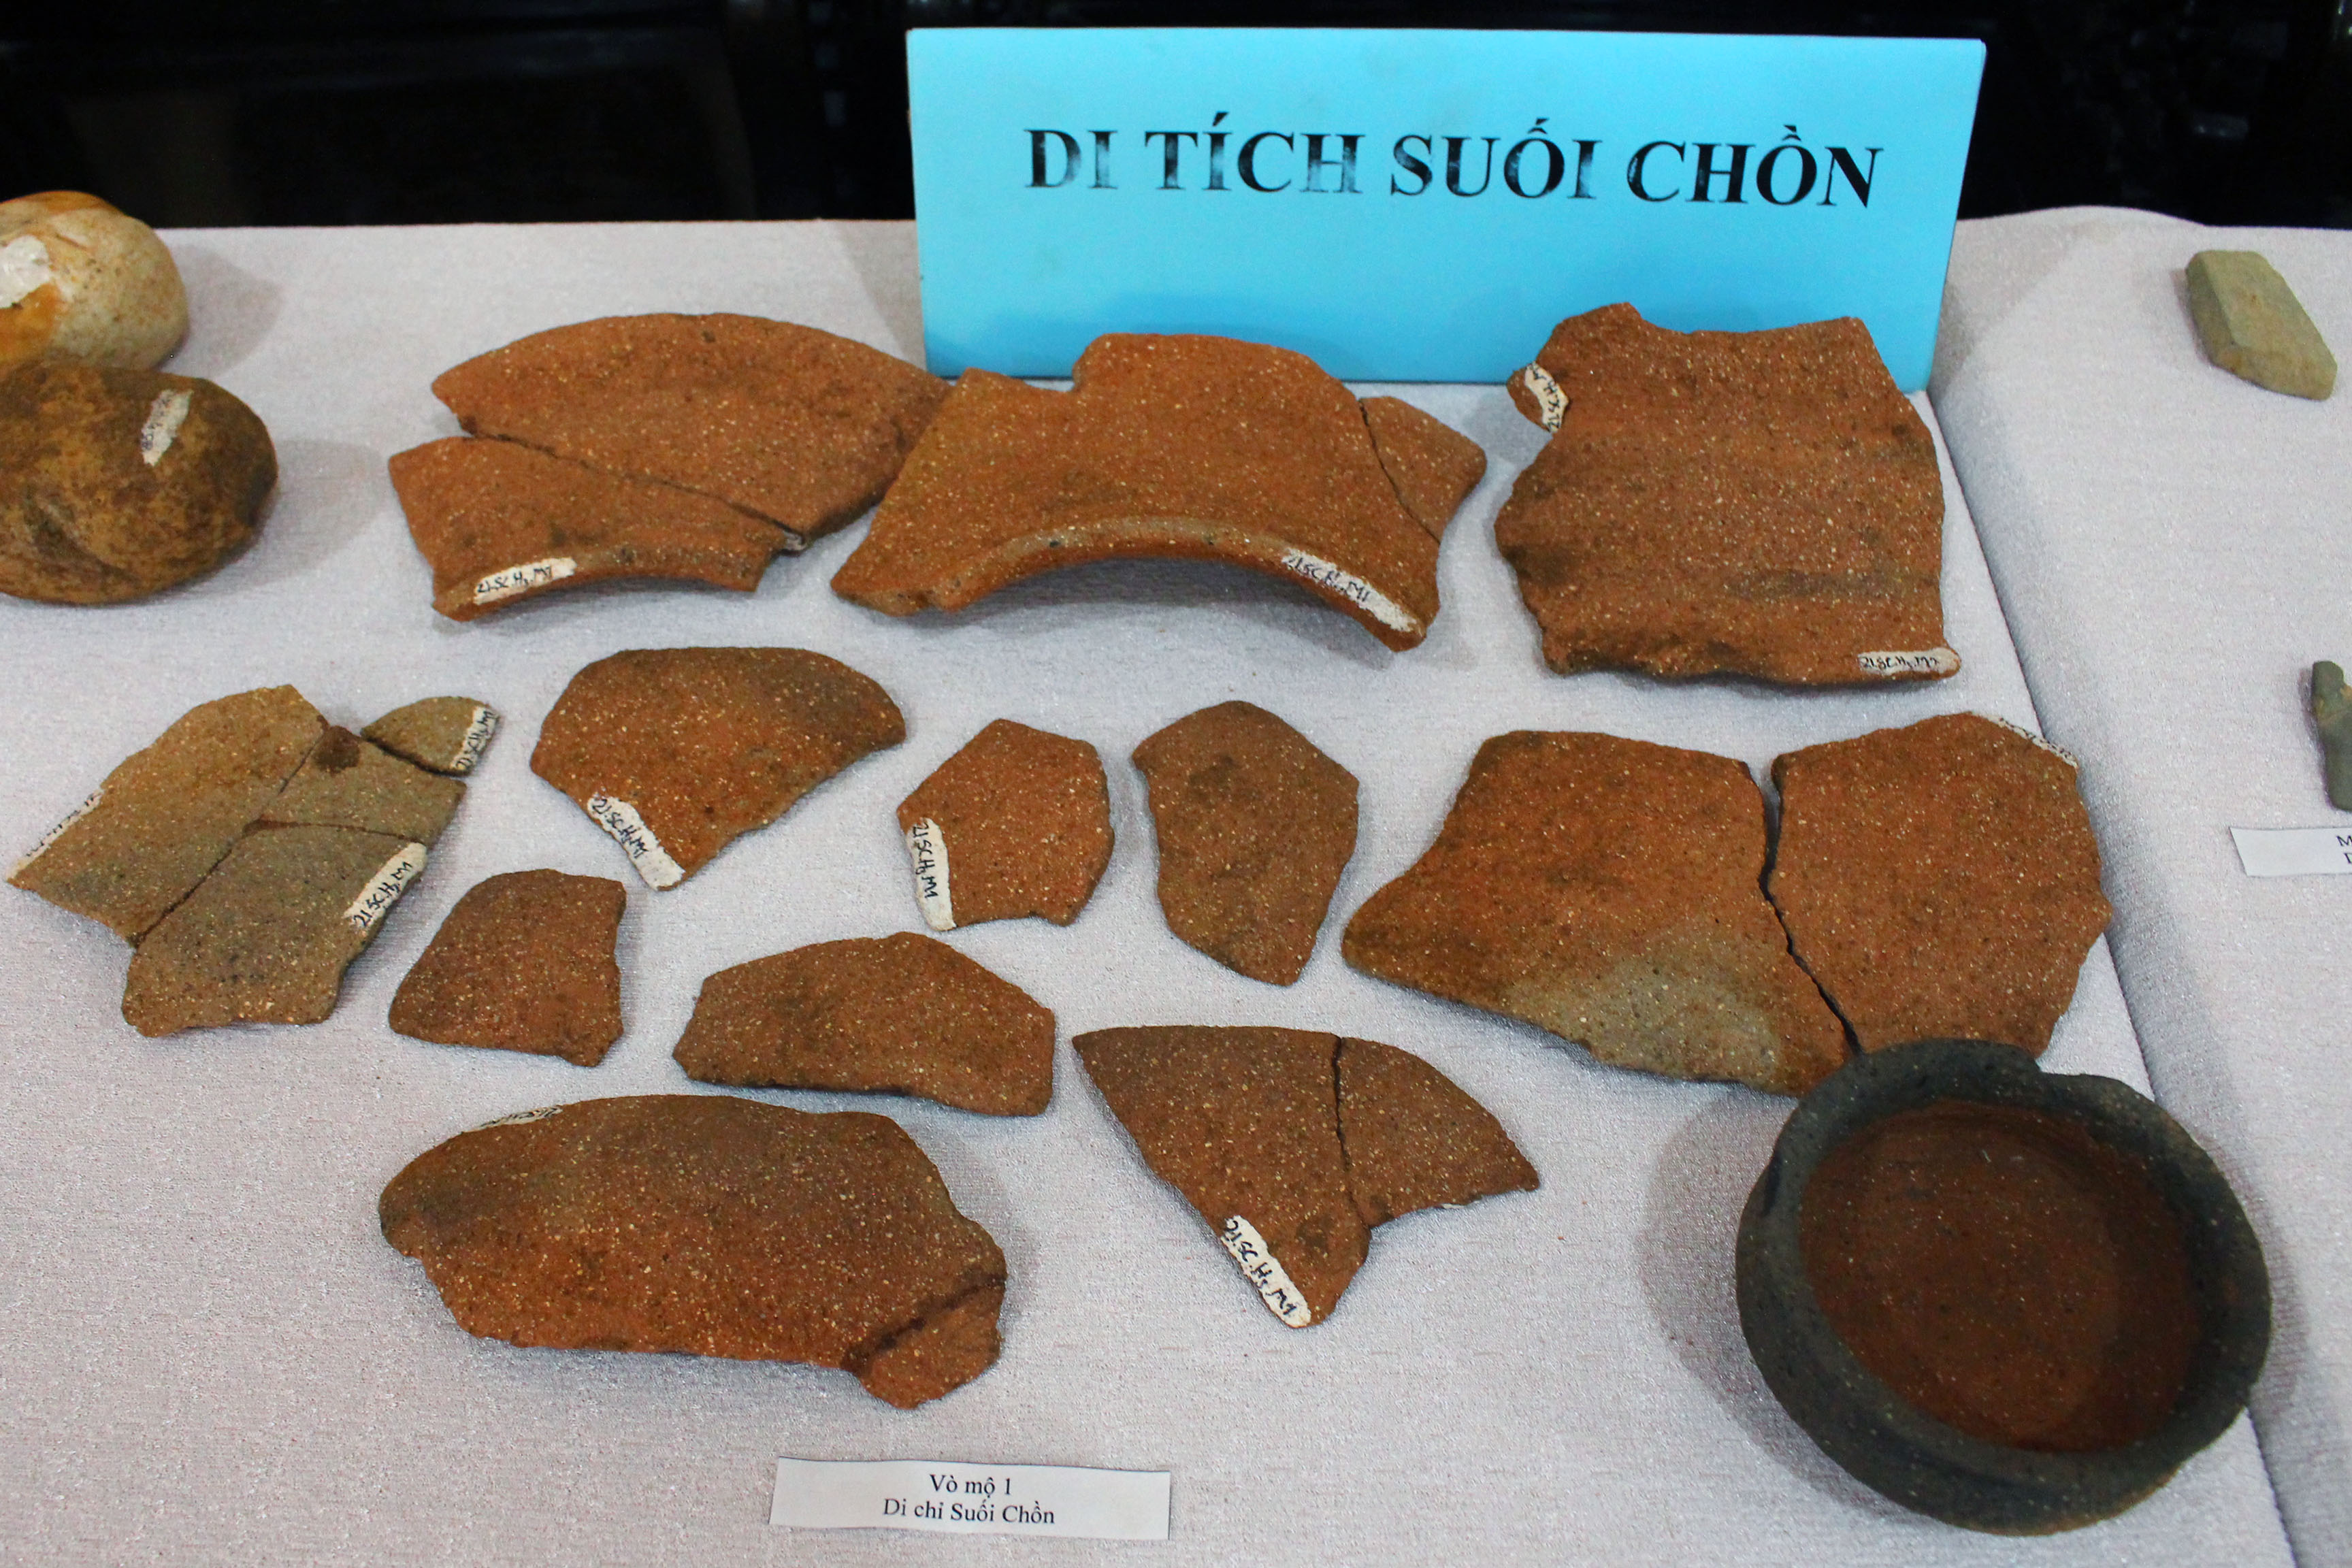 Artifacts excavated from the Cau Sat and Suoi Chon archeological sites are displayed at a press conference in Dong Nai Province, Vietnam, April 27, 2022. Photo: B.A. / Tuoi Tre